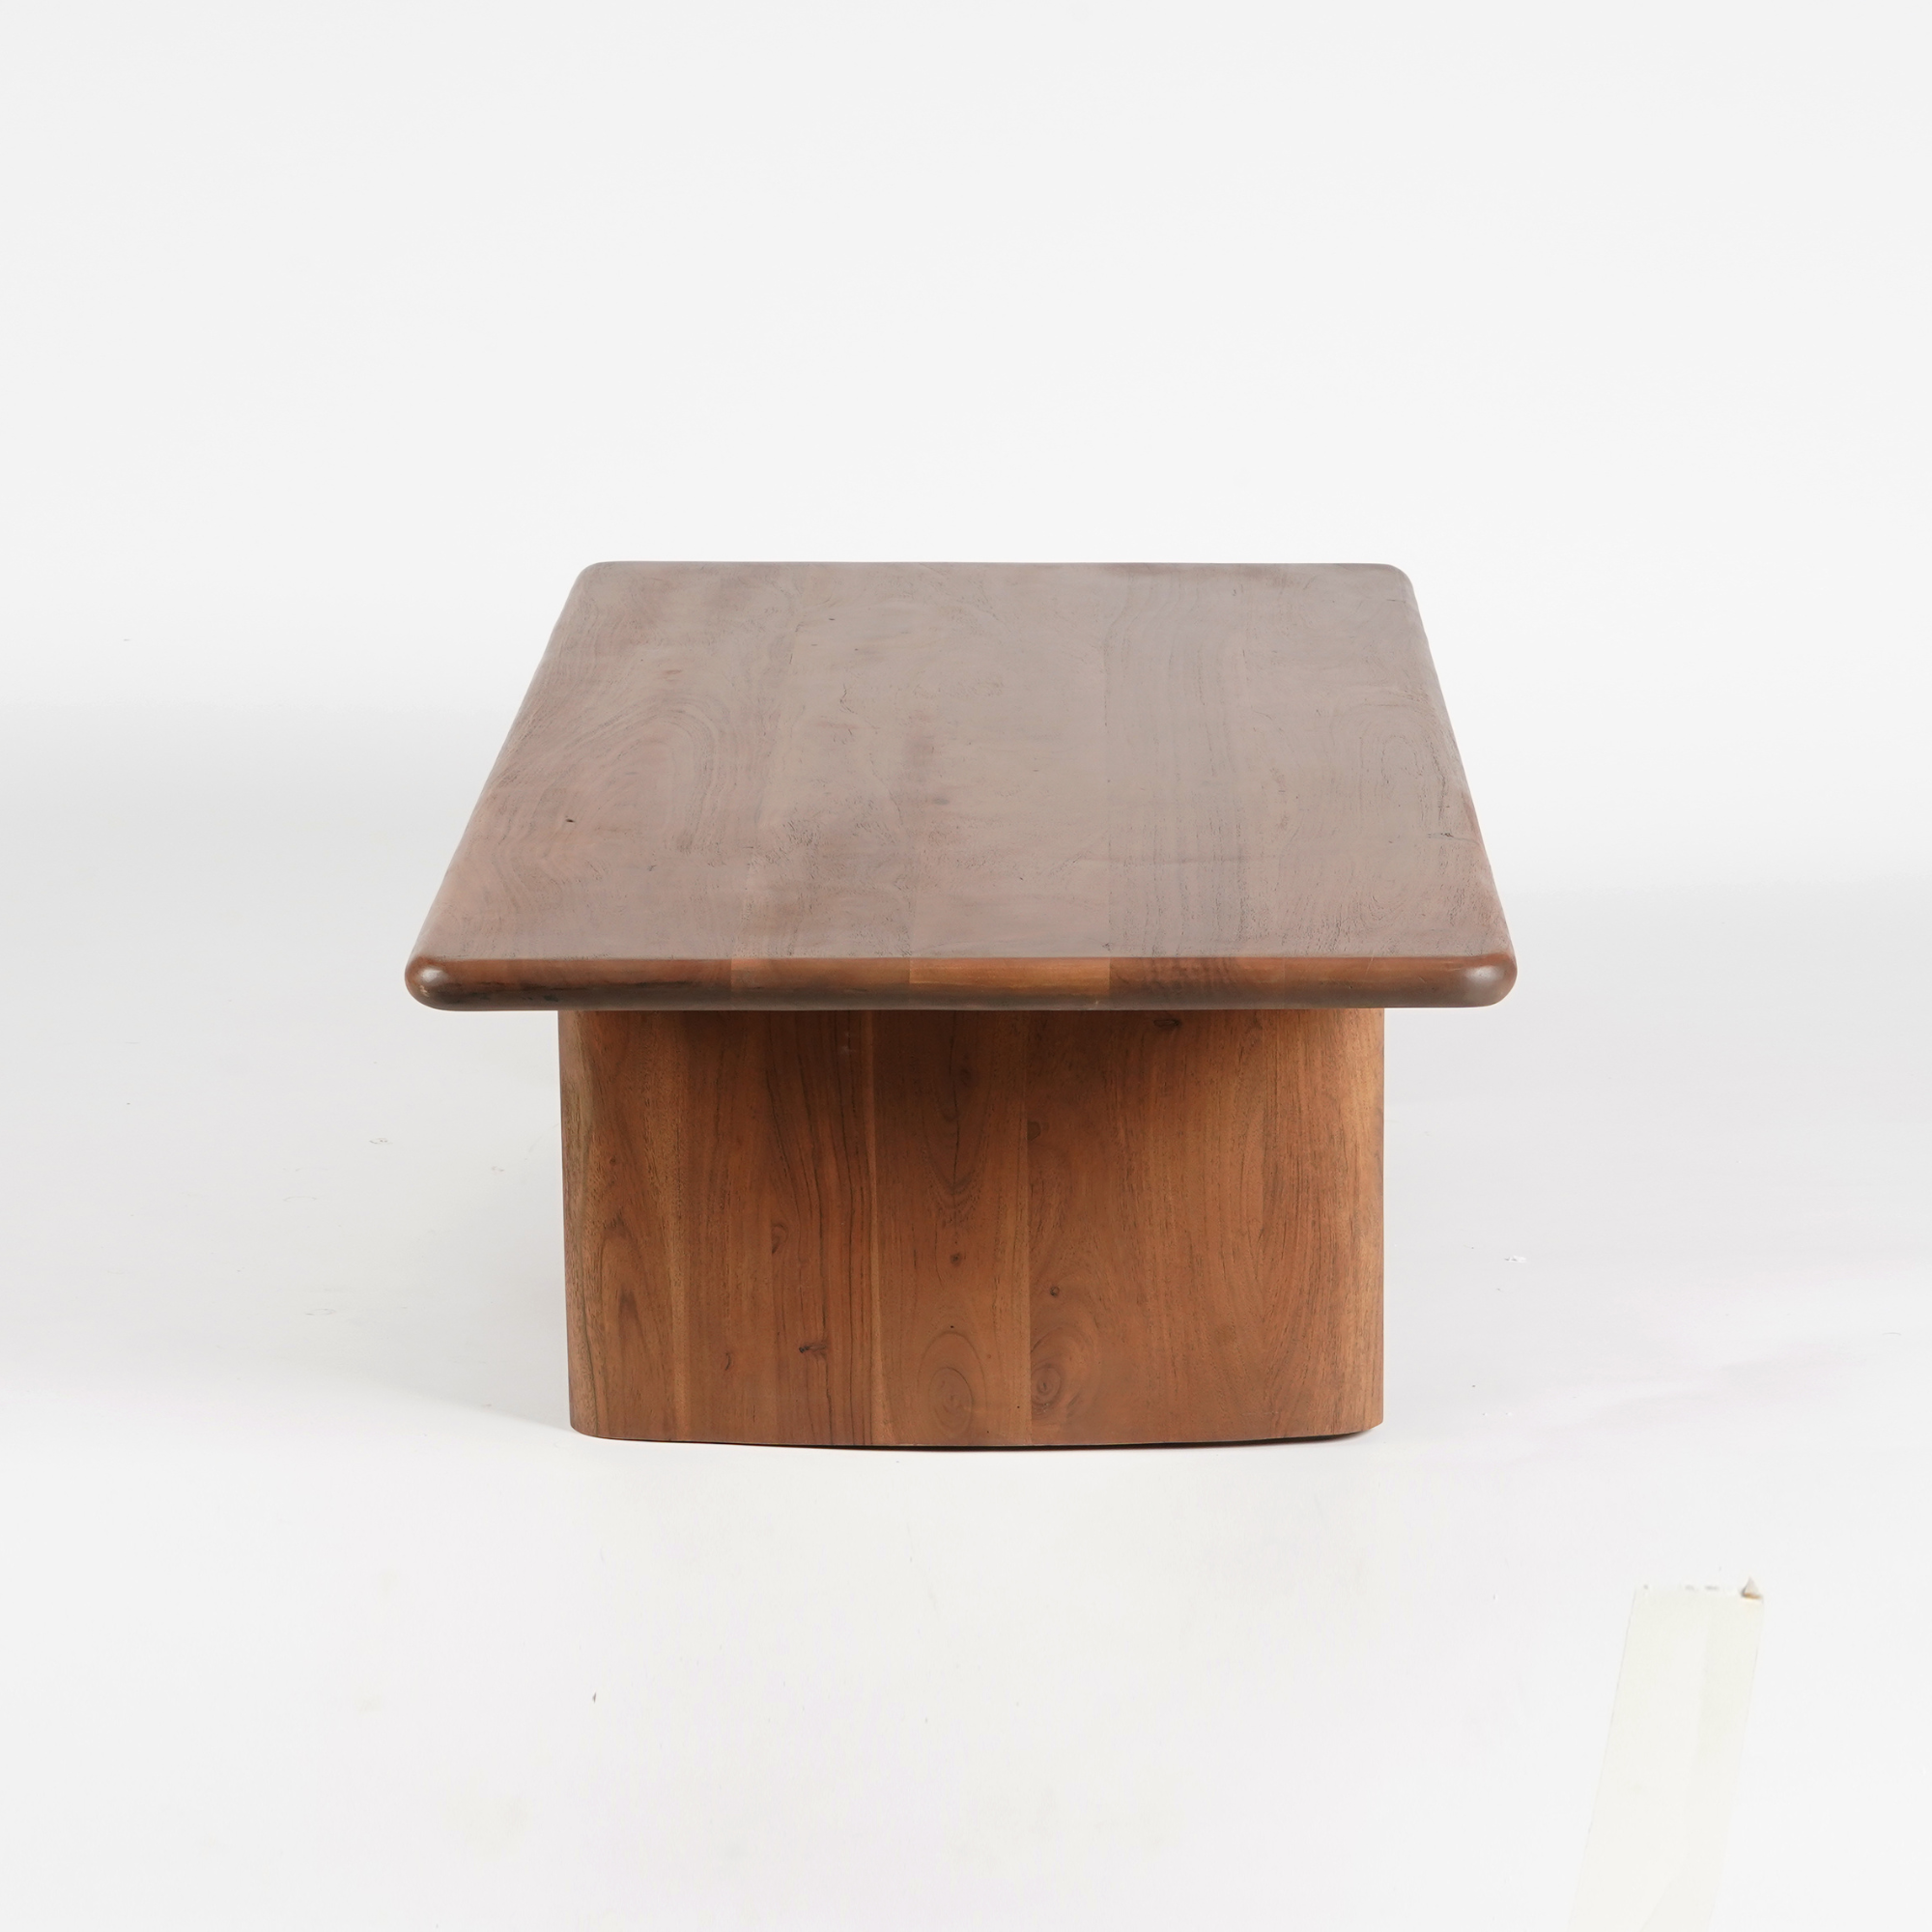 Milav COFFEE TABLE Wooden Top (8785178263873)